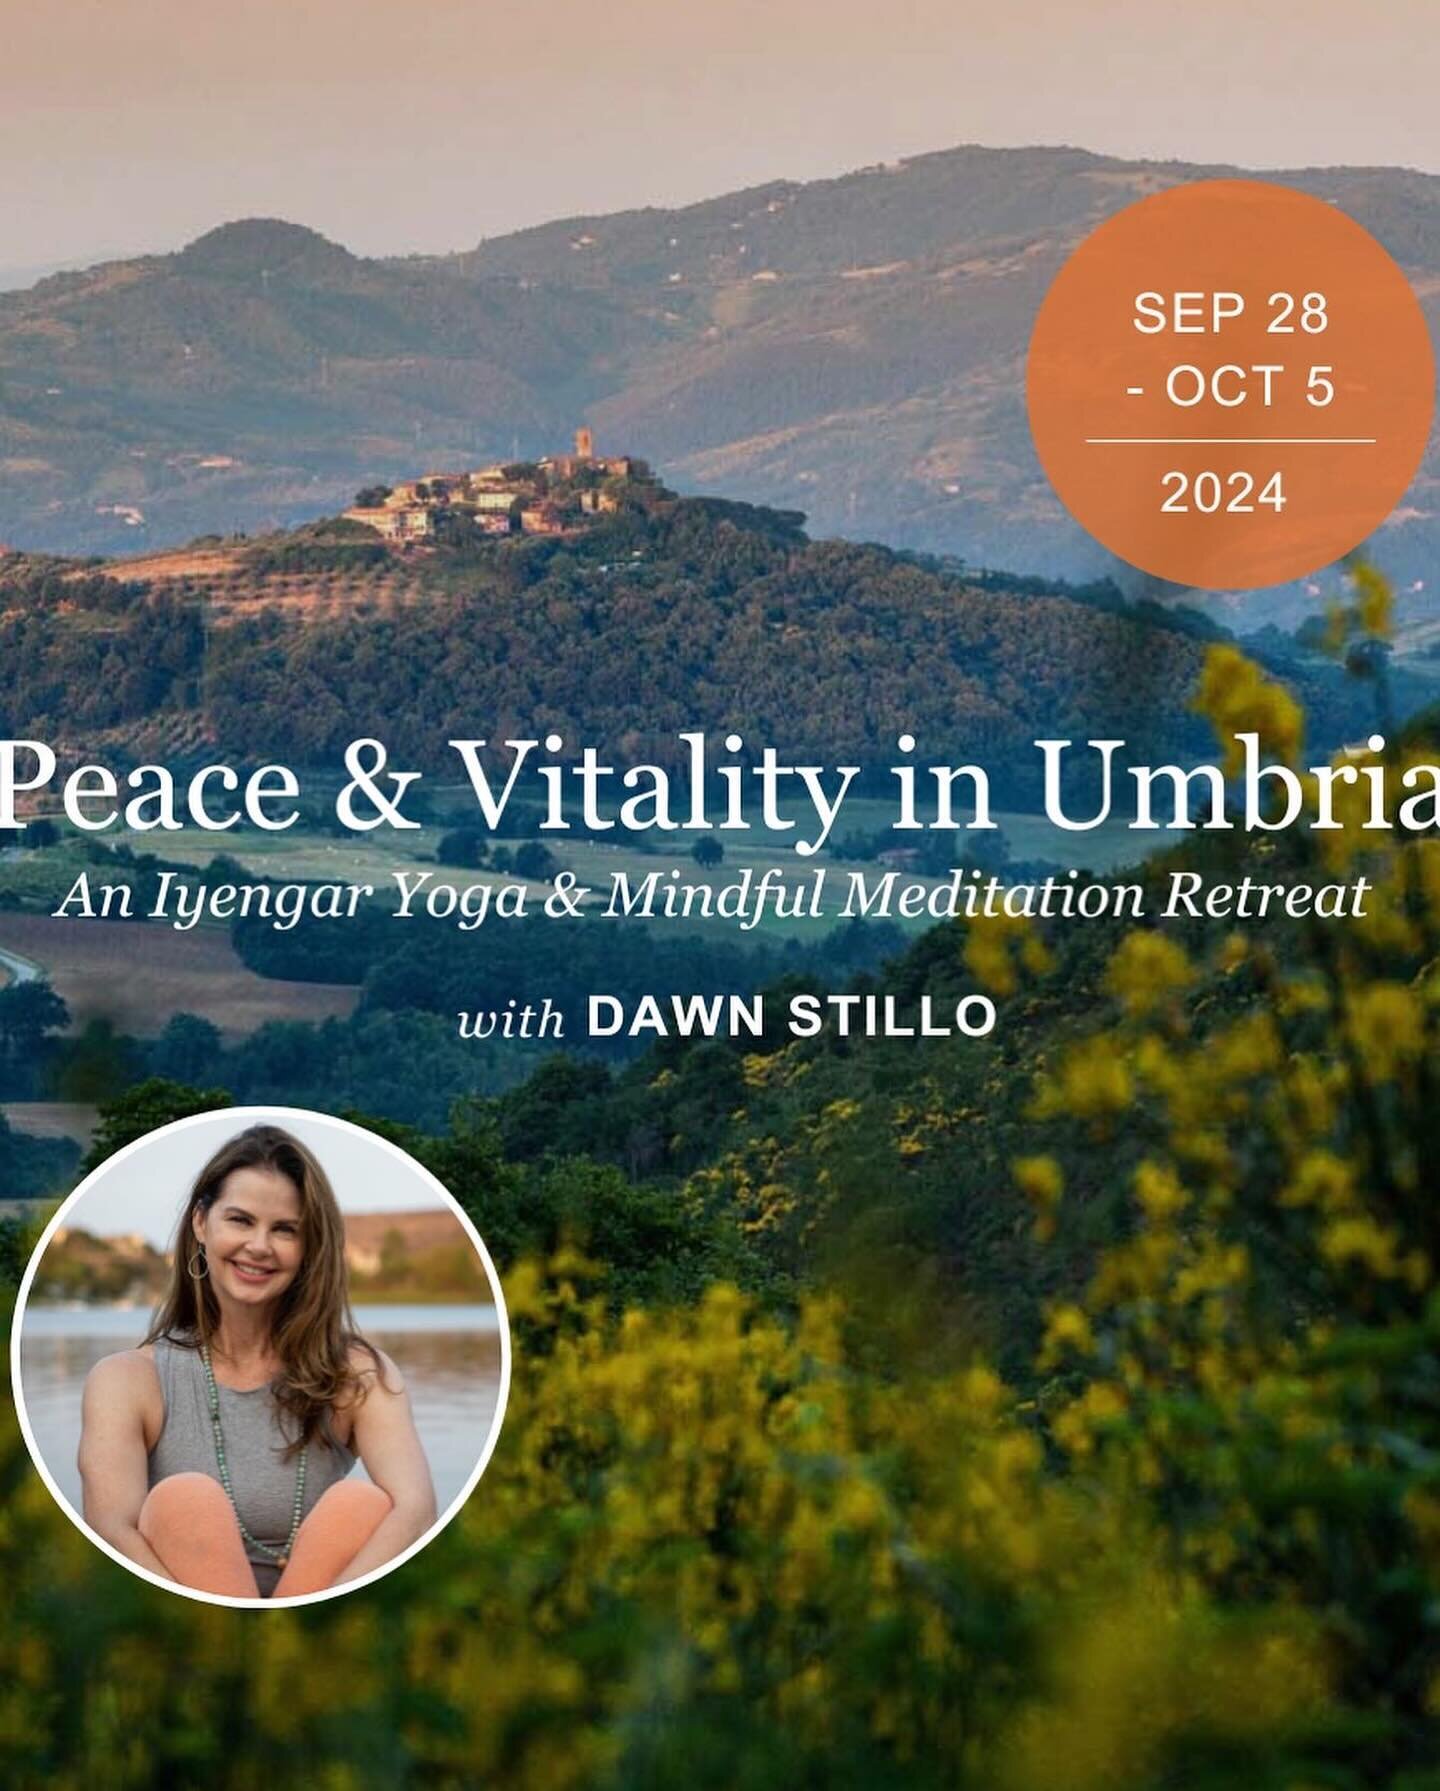 Hello Friends!!

I am excited for this retreat with @internationalyoga to Umbria Italy, Sept 28-Oct 5 2024

Known for its medieval hill towns, dense forests, and local cuisine - particularly foraged truffles and wines! Our home for the week is an int